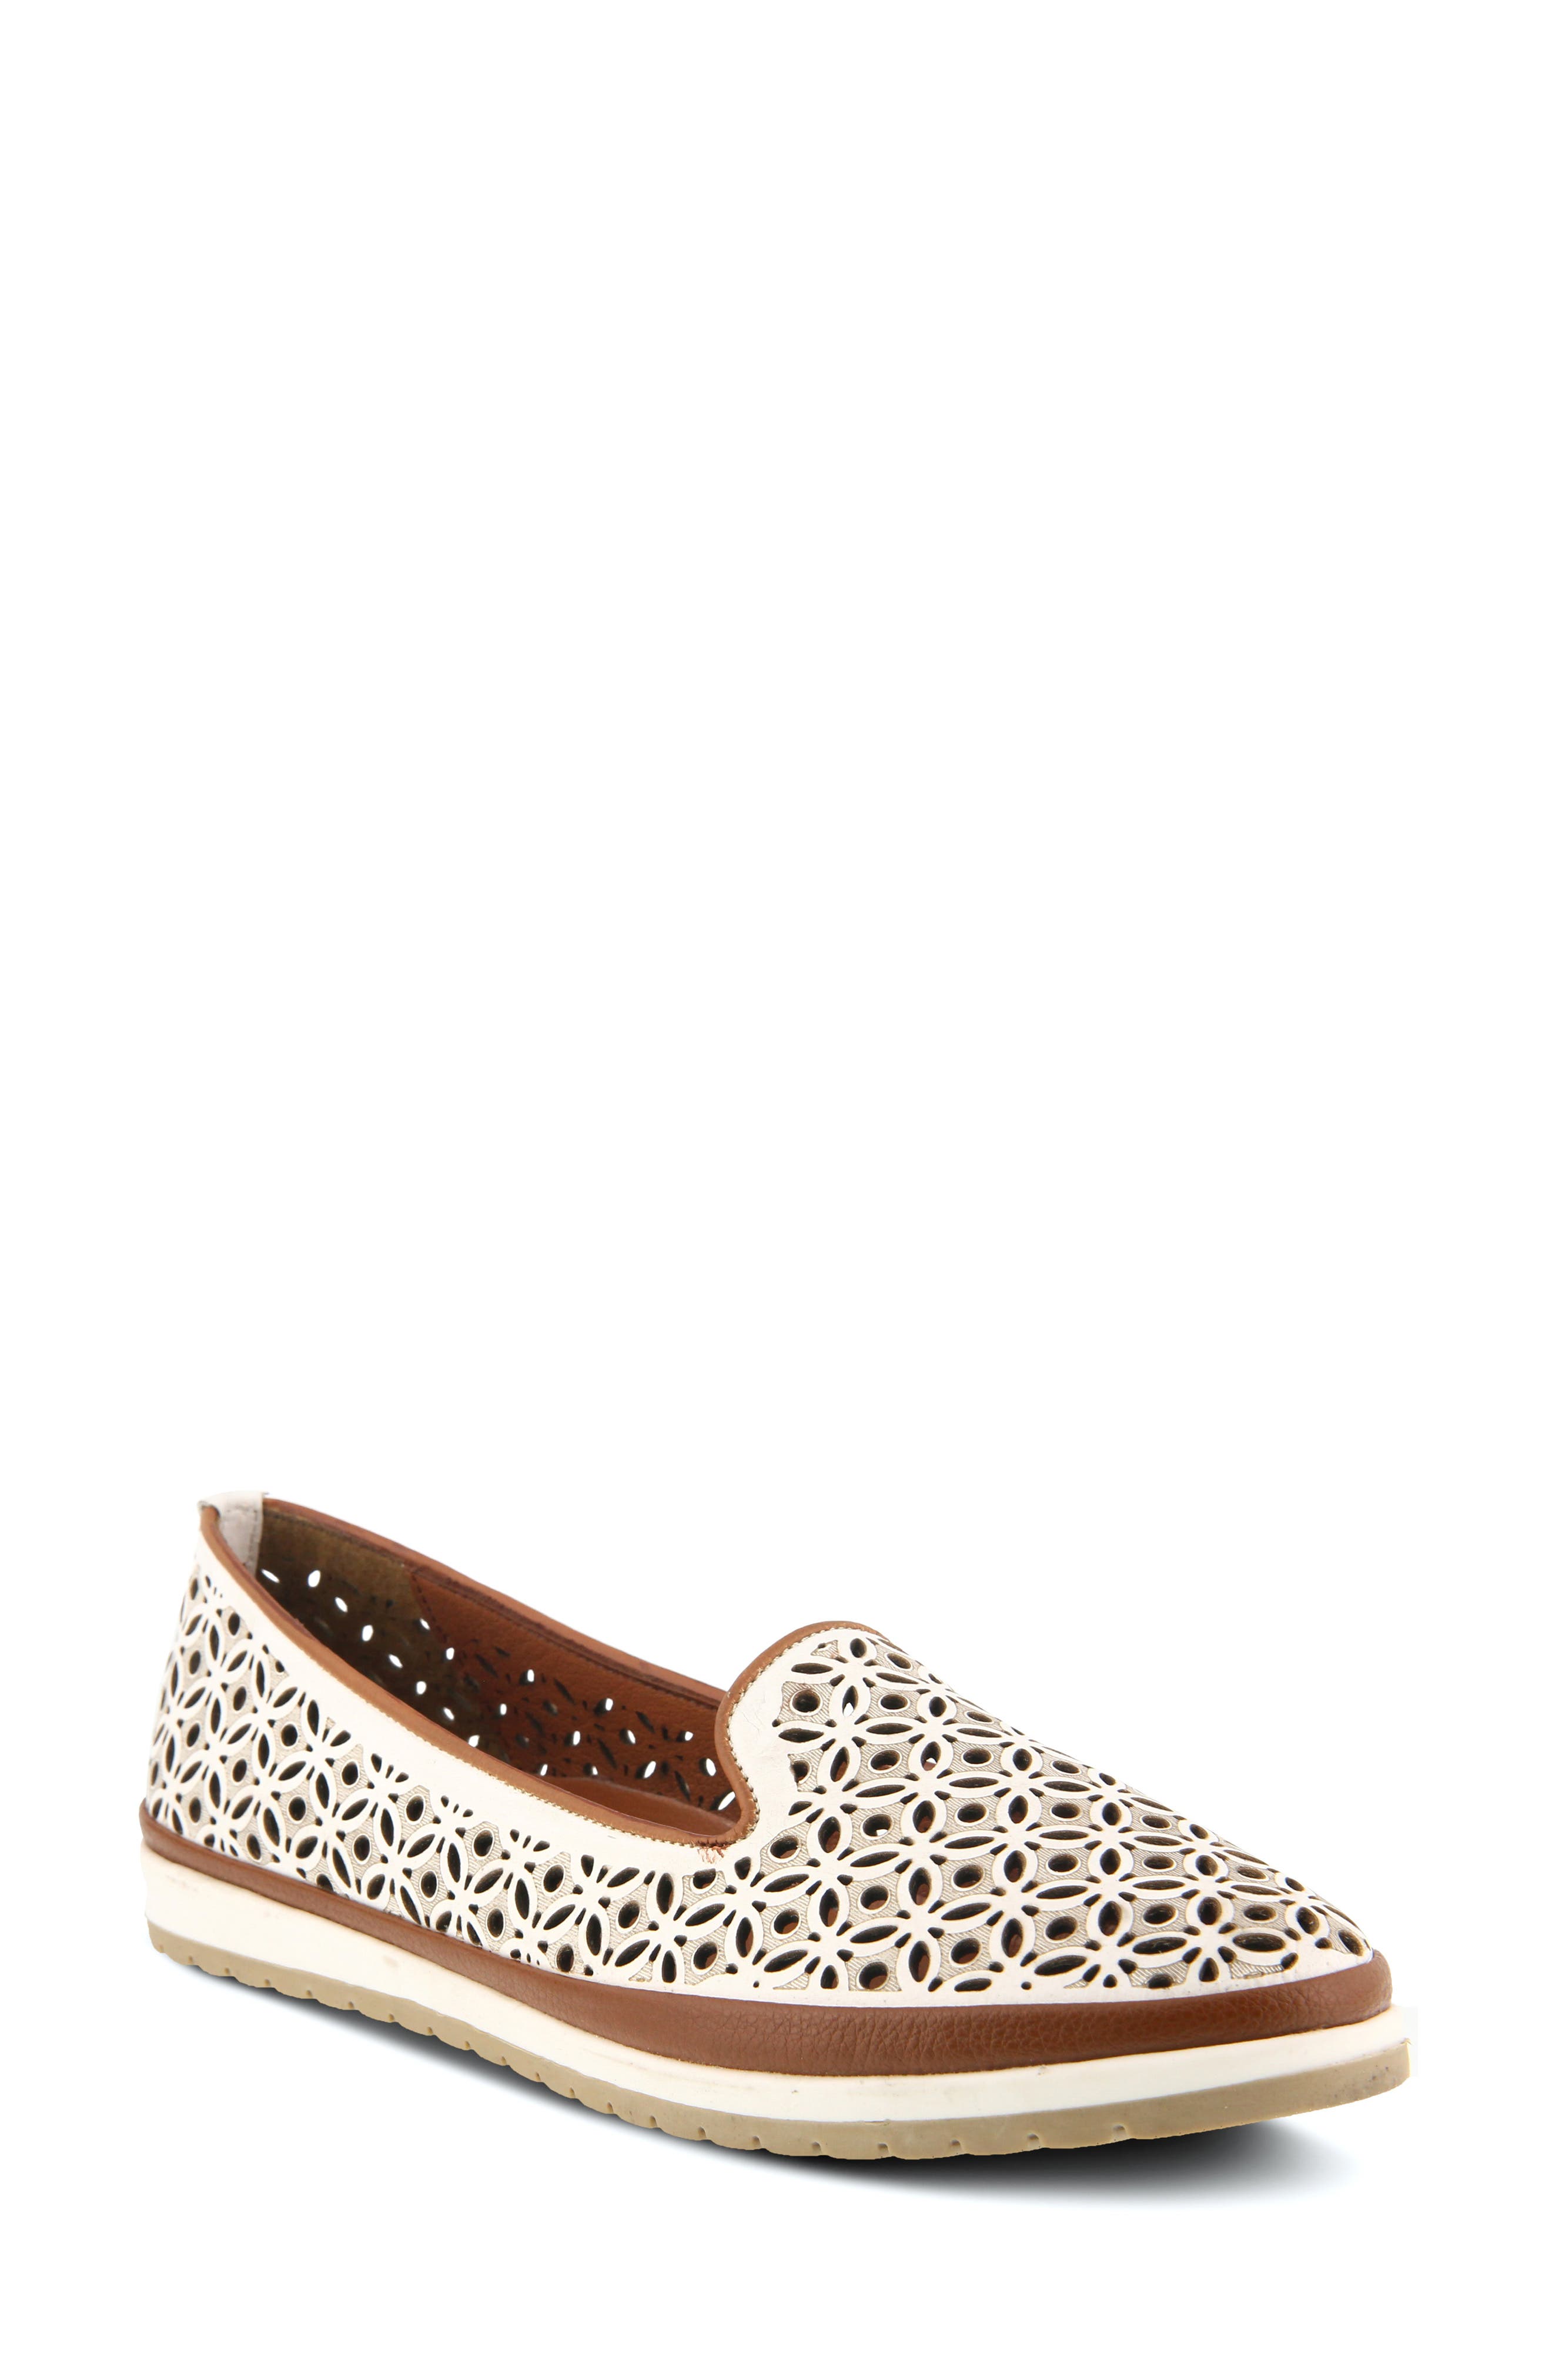 Women's Flats Spring Step Shoes | Nordstrom